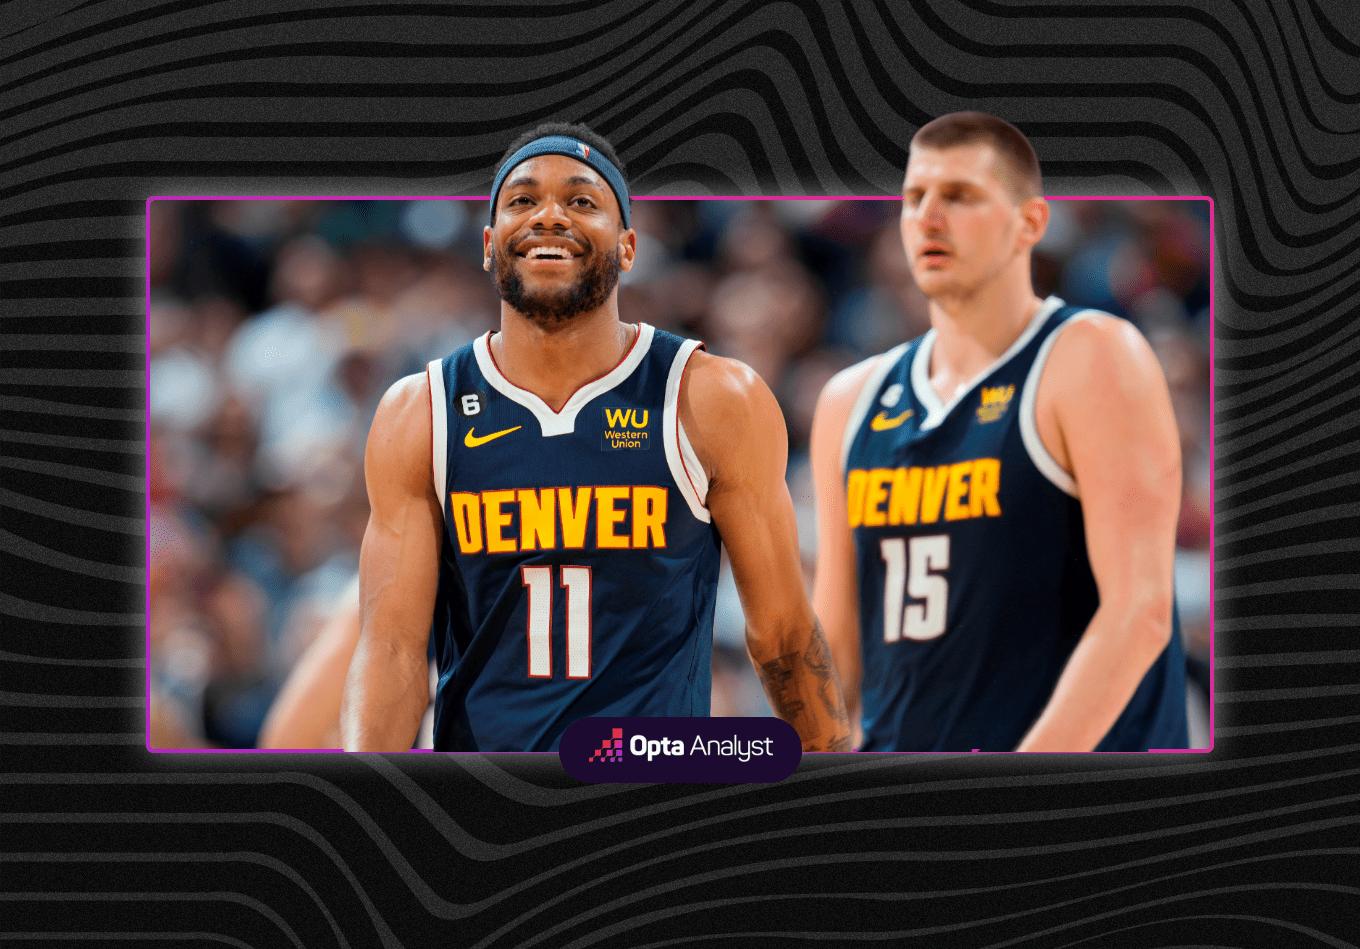 The Difference in Denver: How Bruce Brown’s Emergence Has the Nuggets on the Verge of the NBA Finals